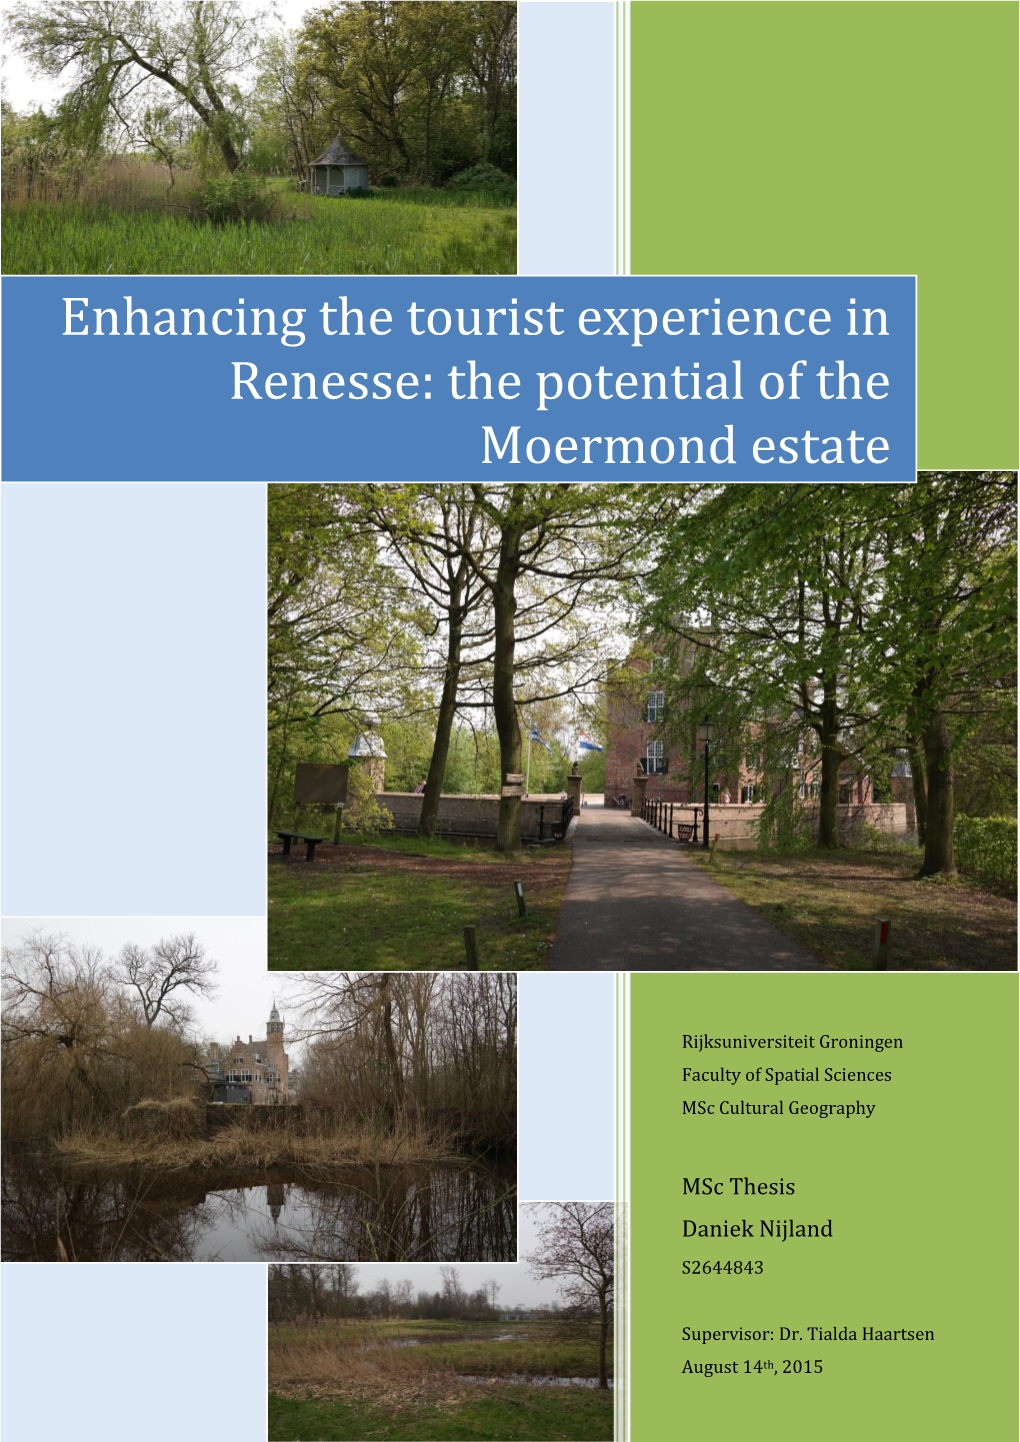 Enhancing the Tourist Experience in Renesse: the Potential of the Moermond Estate